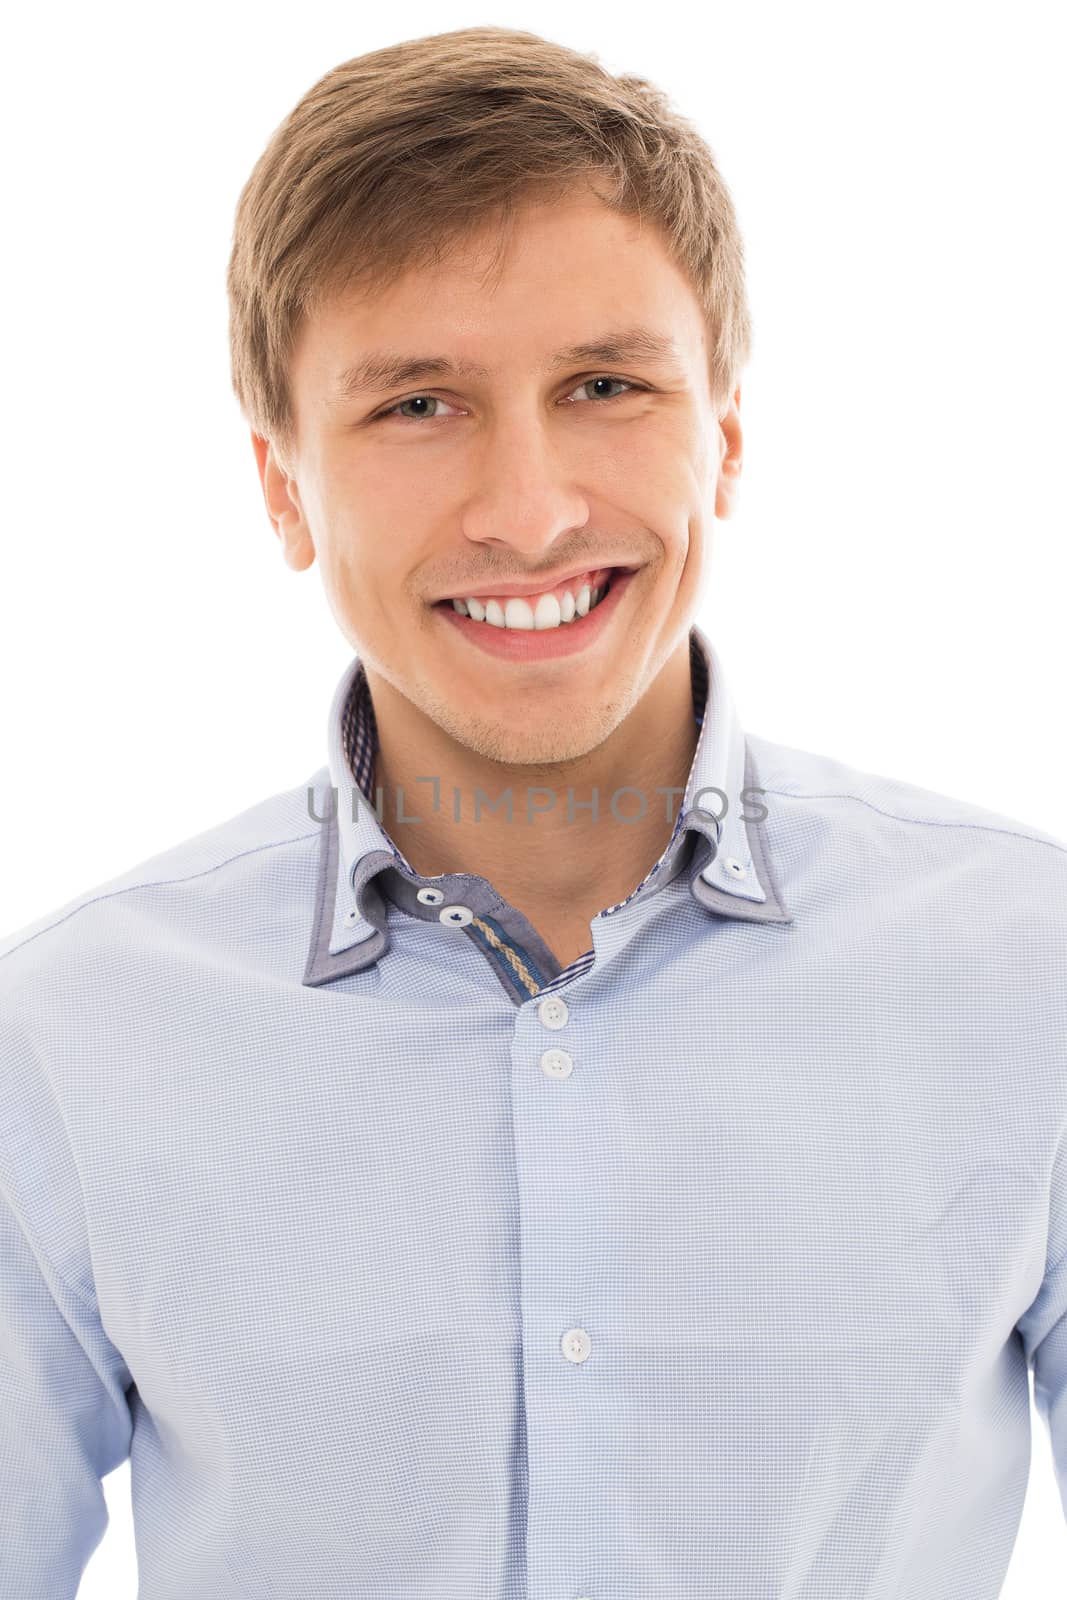 Handsome man in a blue shirt smiling over a white background